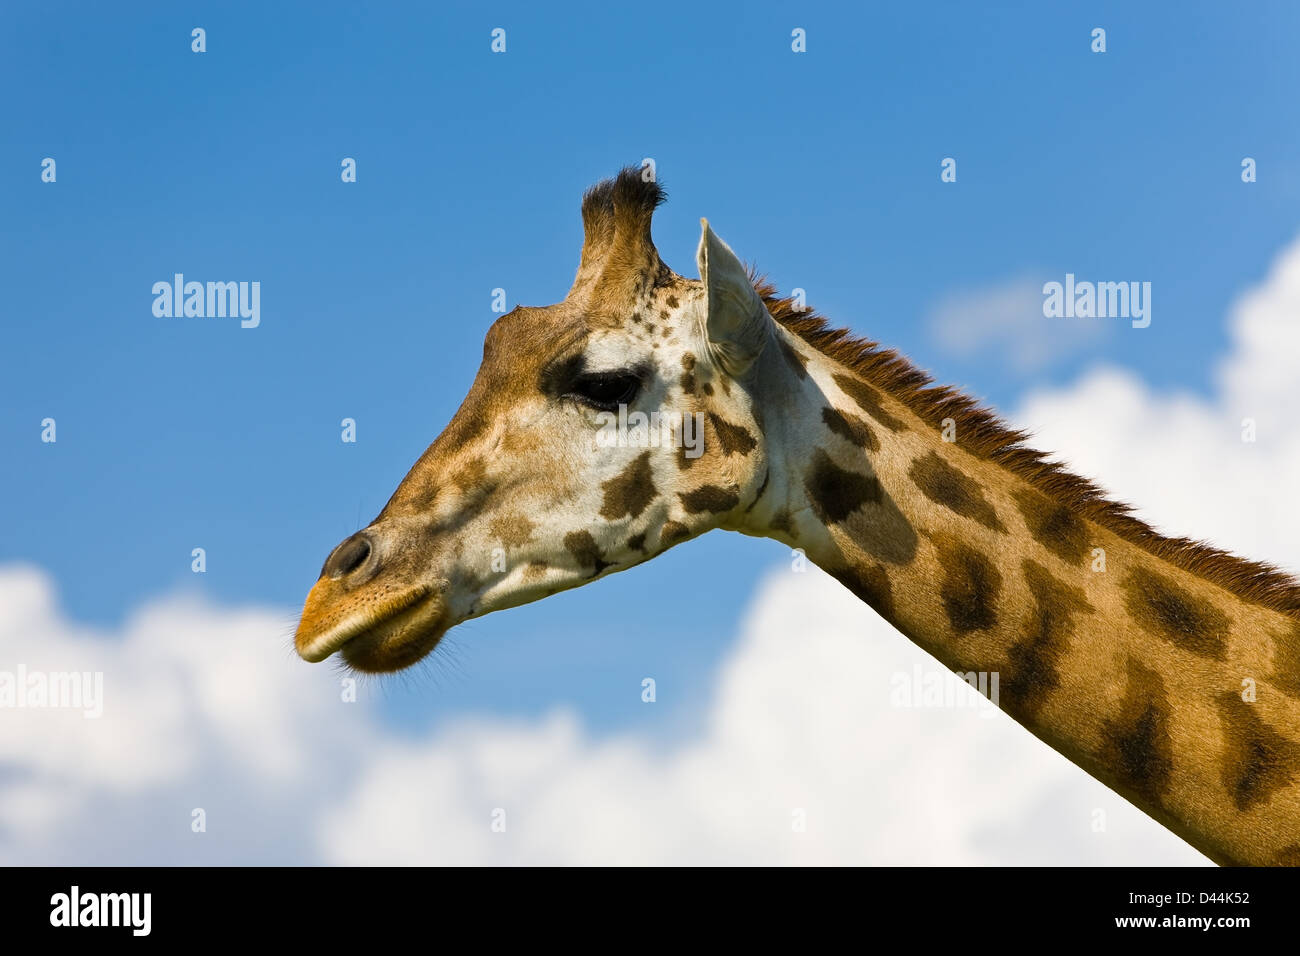 Giraffe head over a blue sky with some clouds in the background Stock Photo